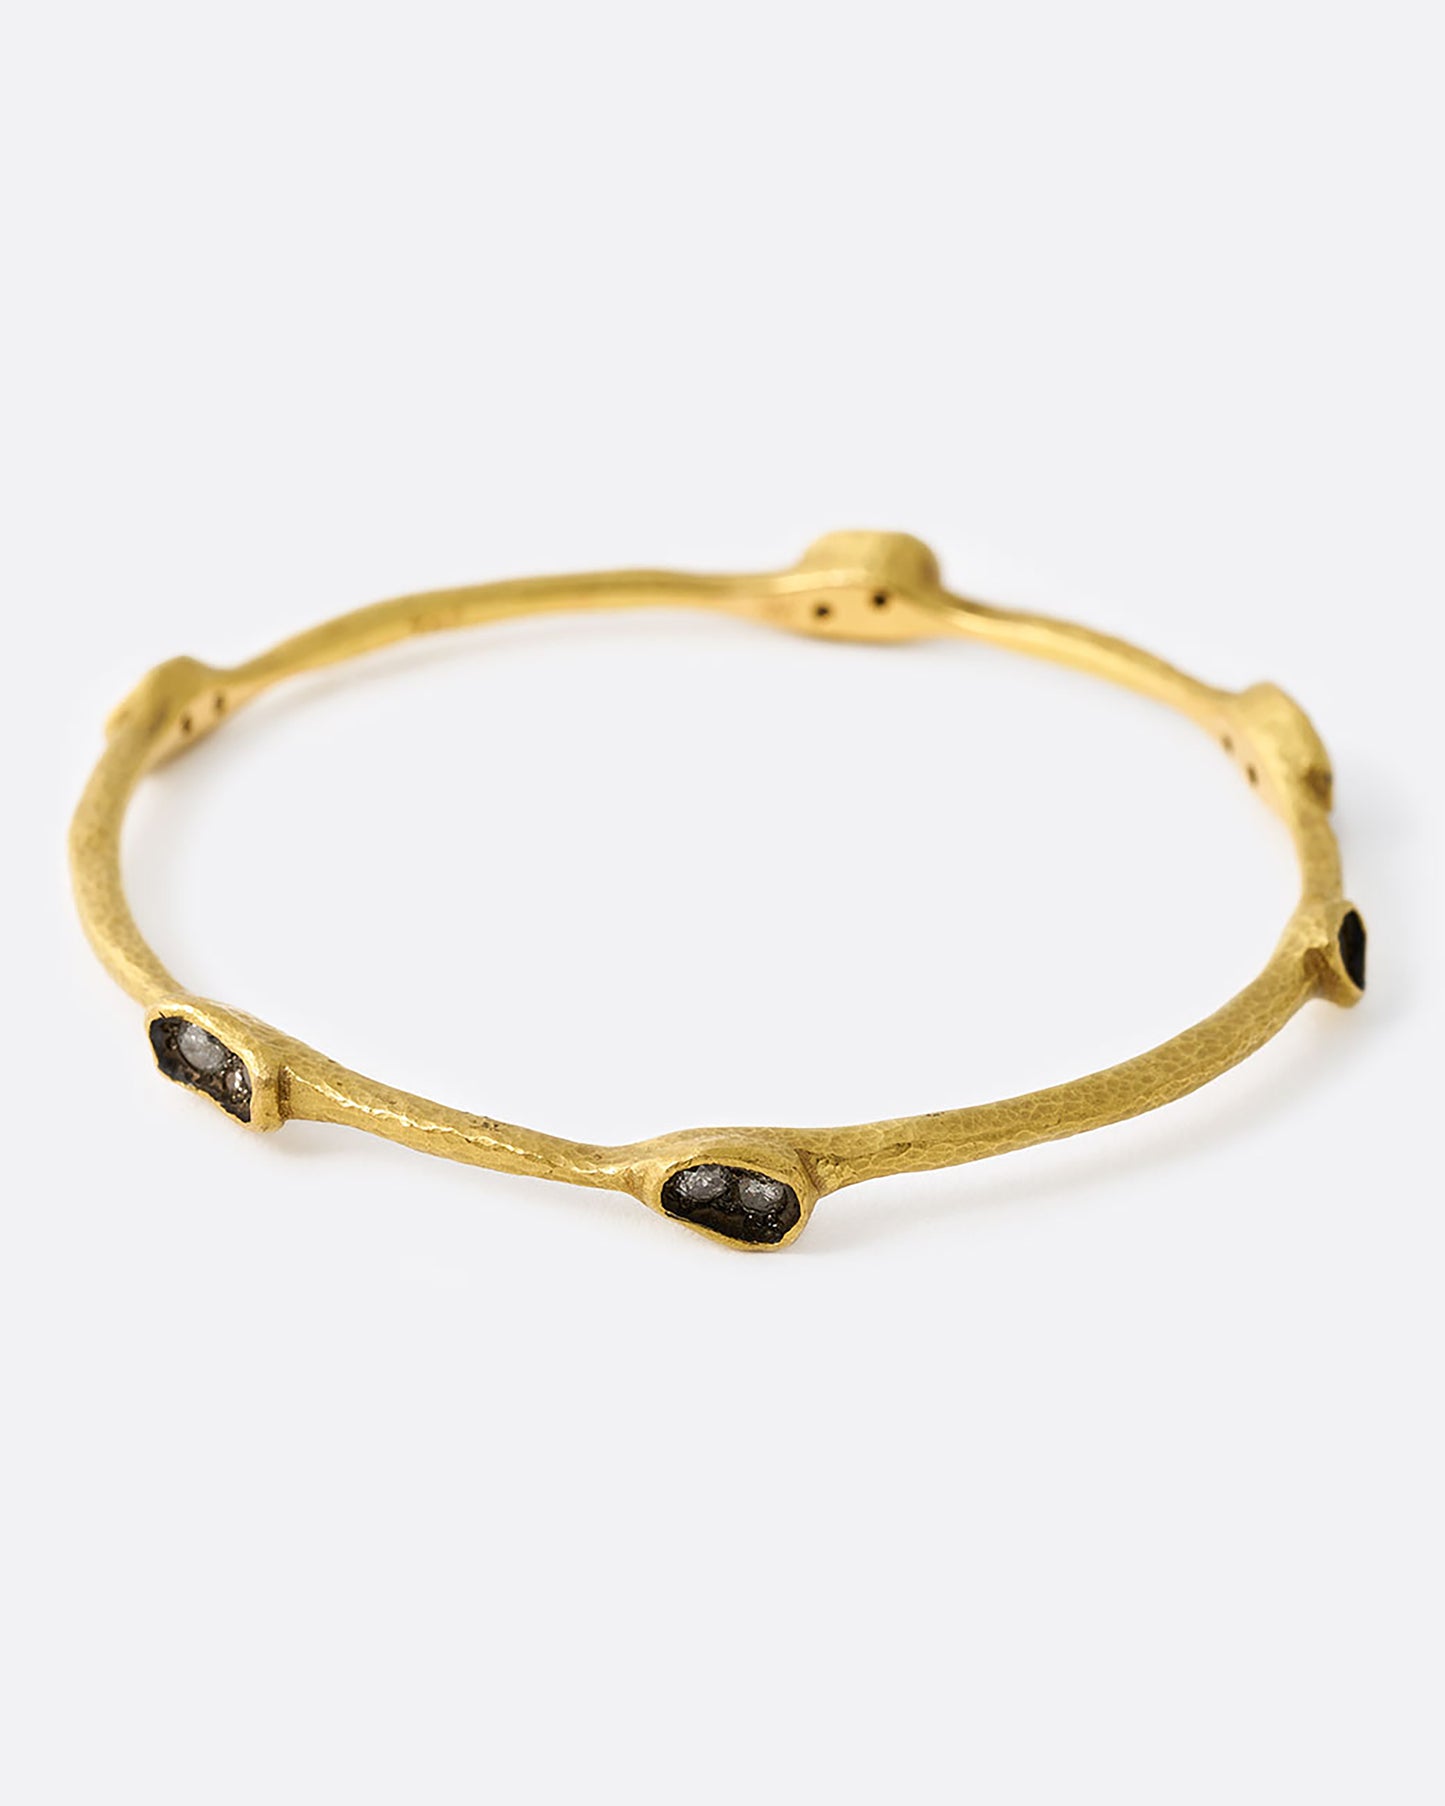 Yellow gold bangle bracelet with diamonds in oval settings, shown from the front.